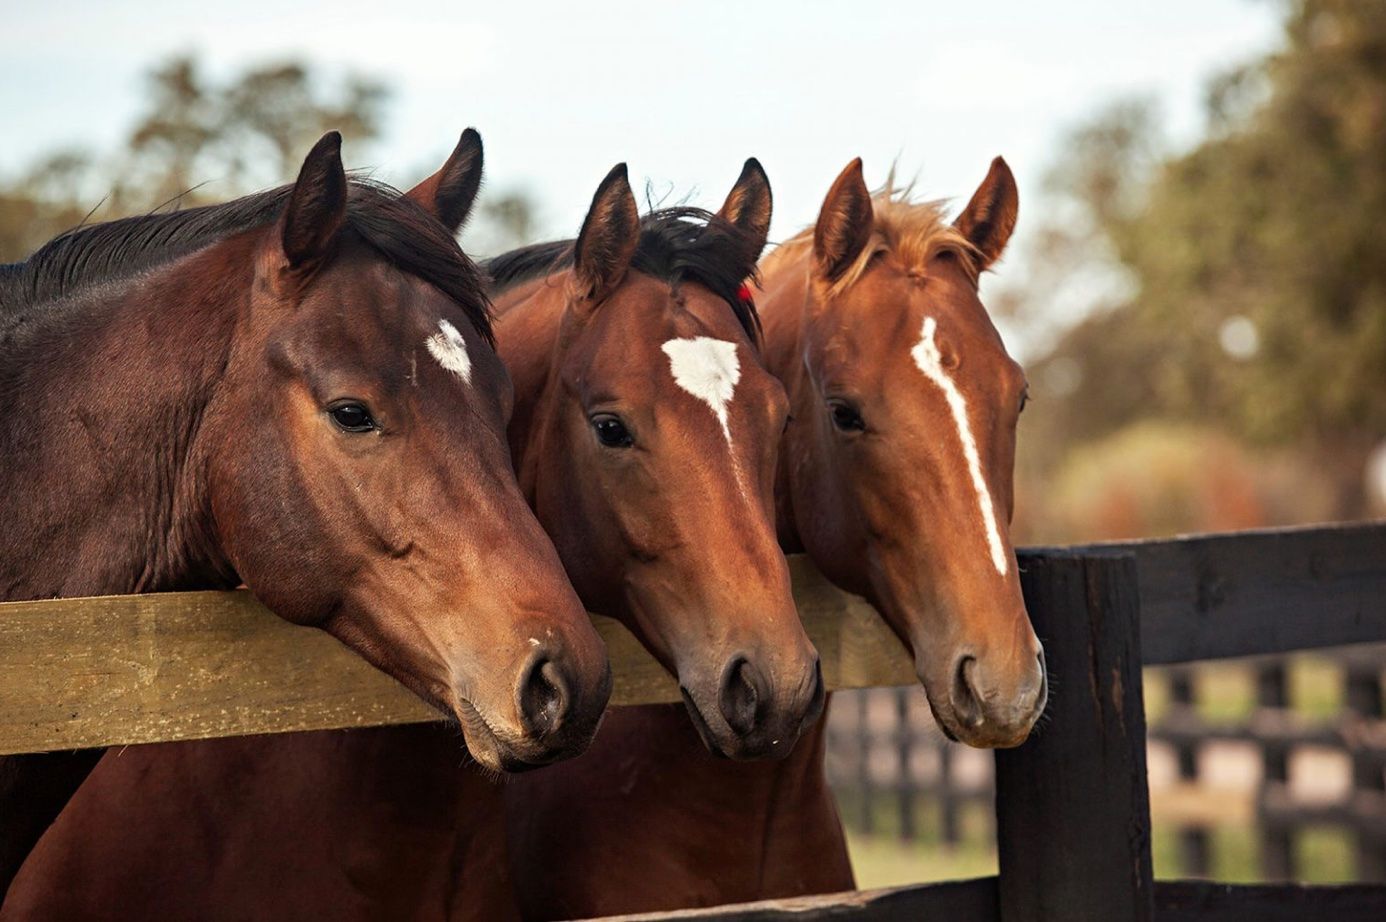 Three brown horses are leaning over a wooden fence.